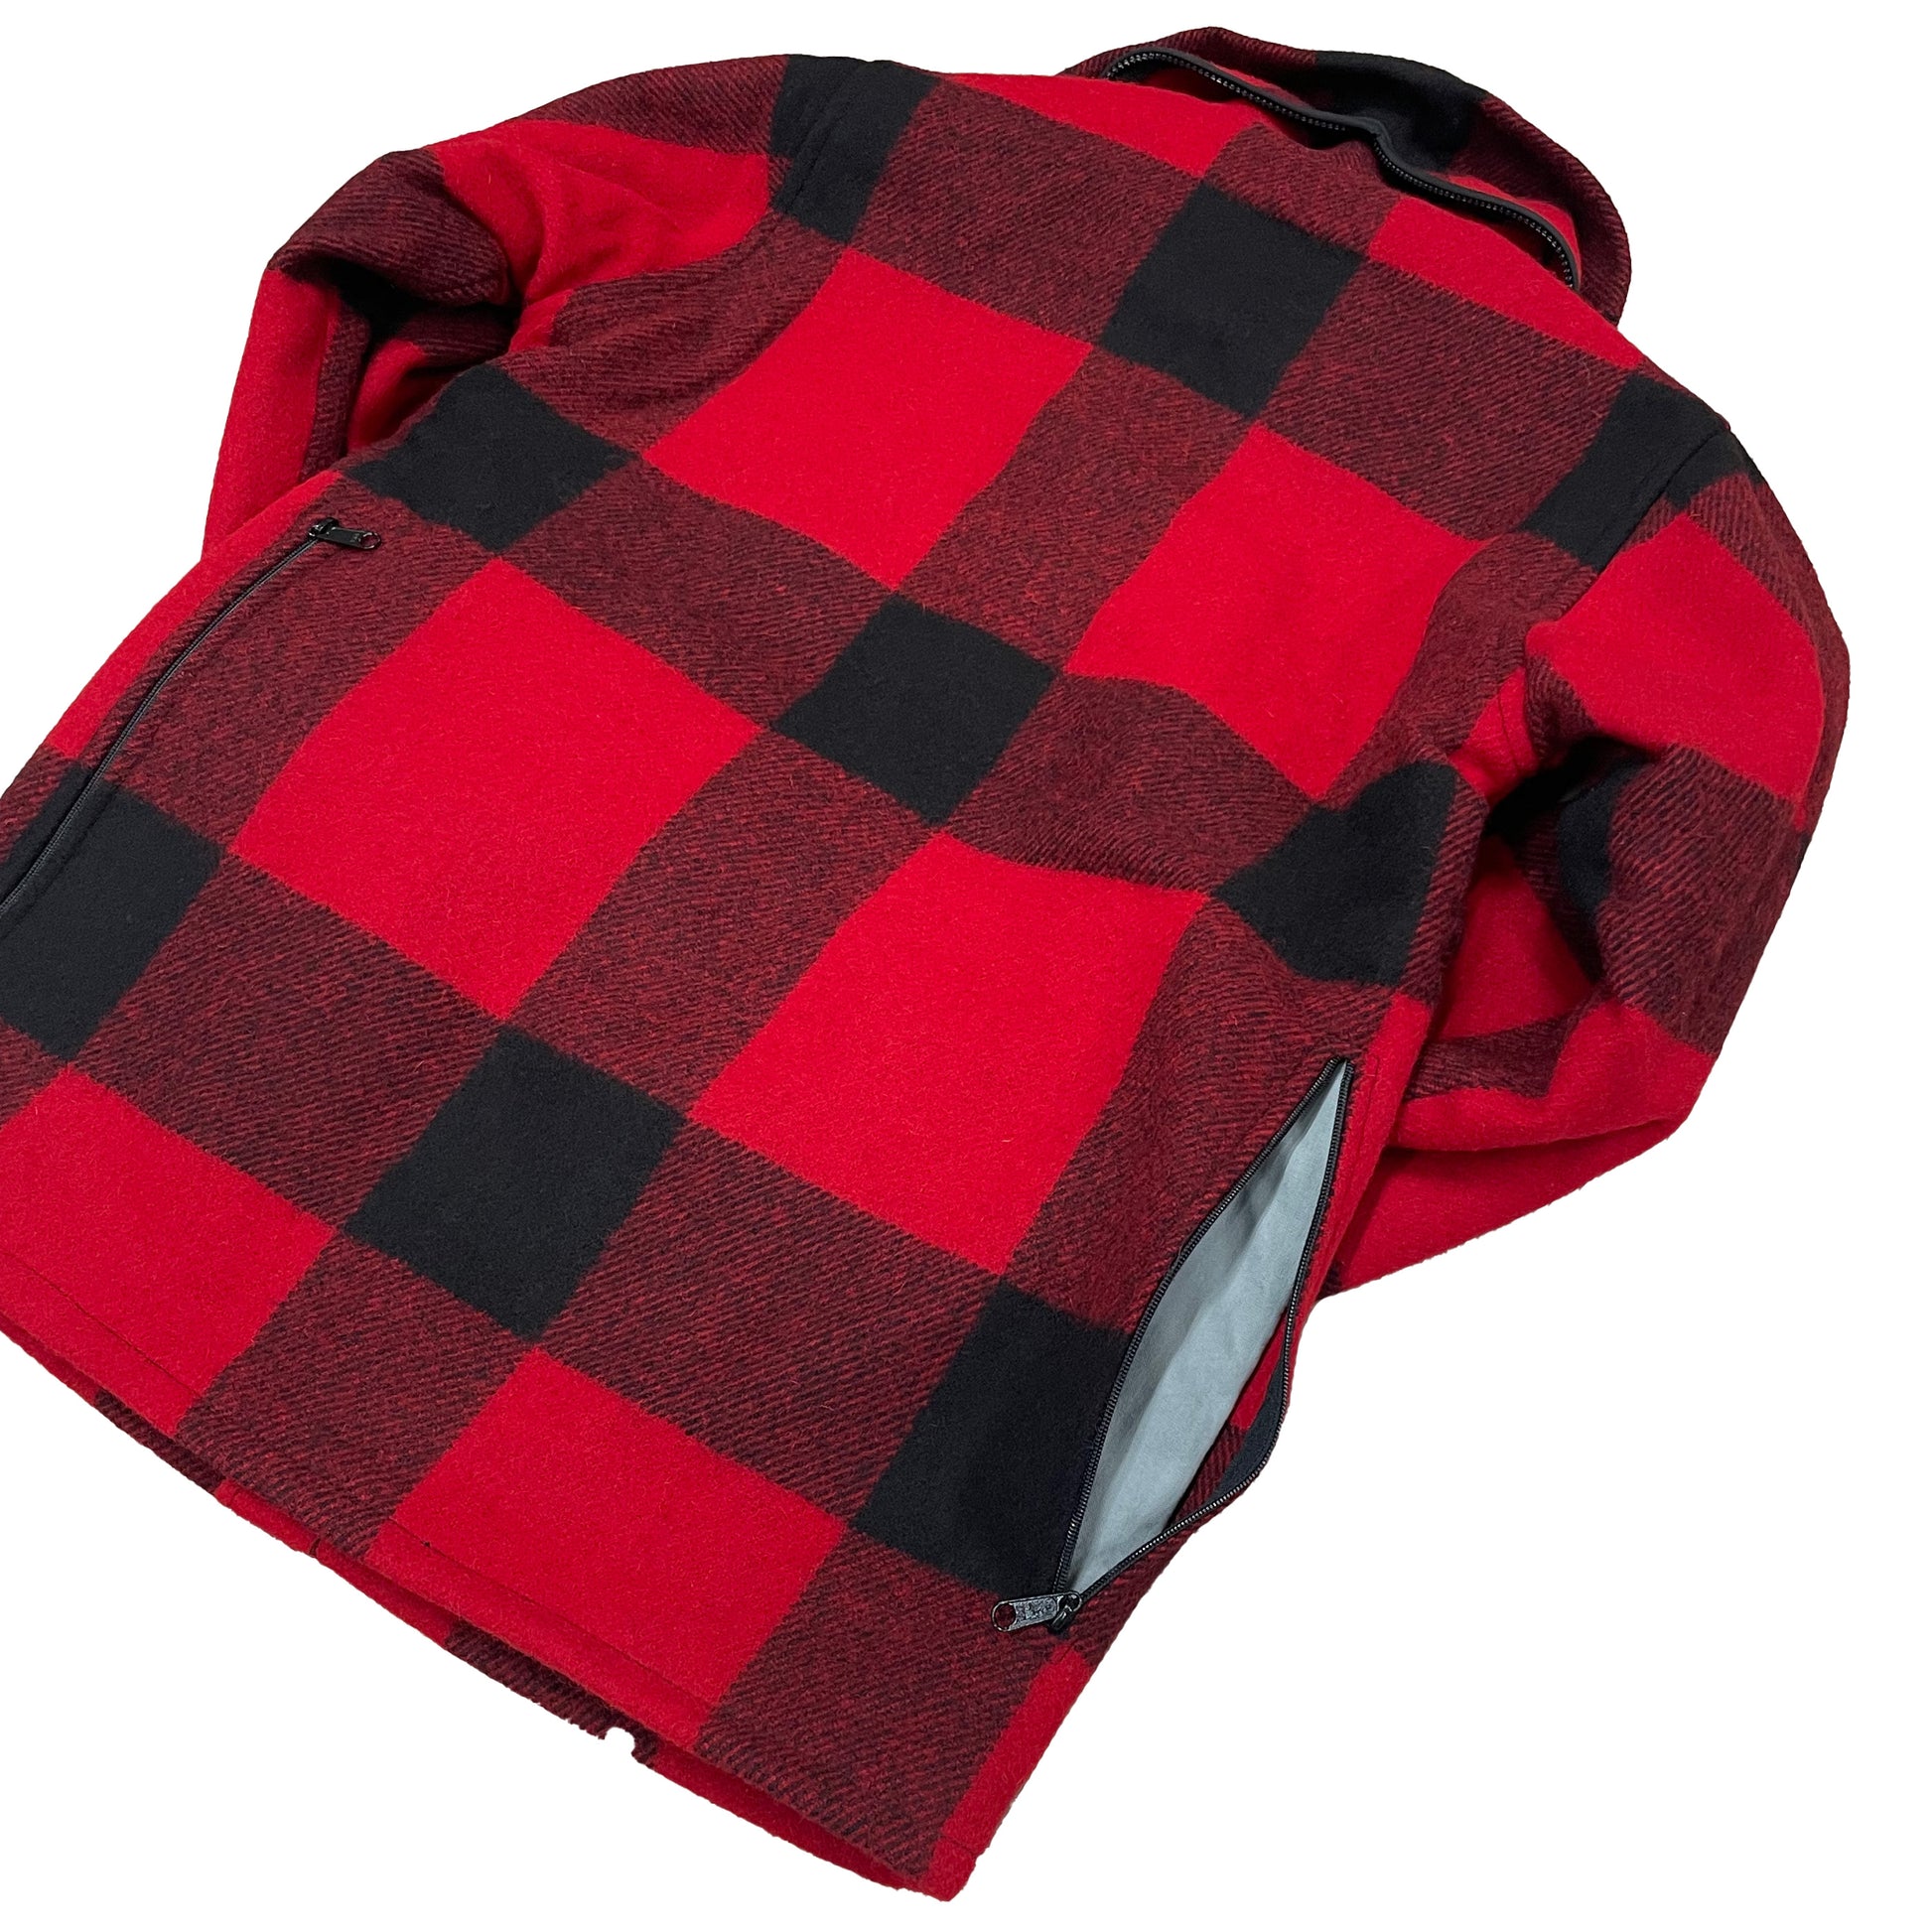 Johnson Woolen Mills Red and black buffalo check outdoor wool coat back pocket detail